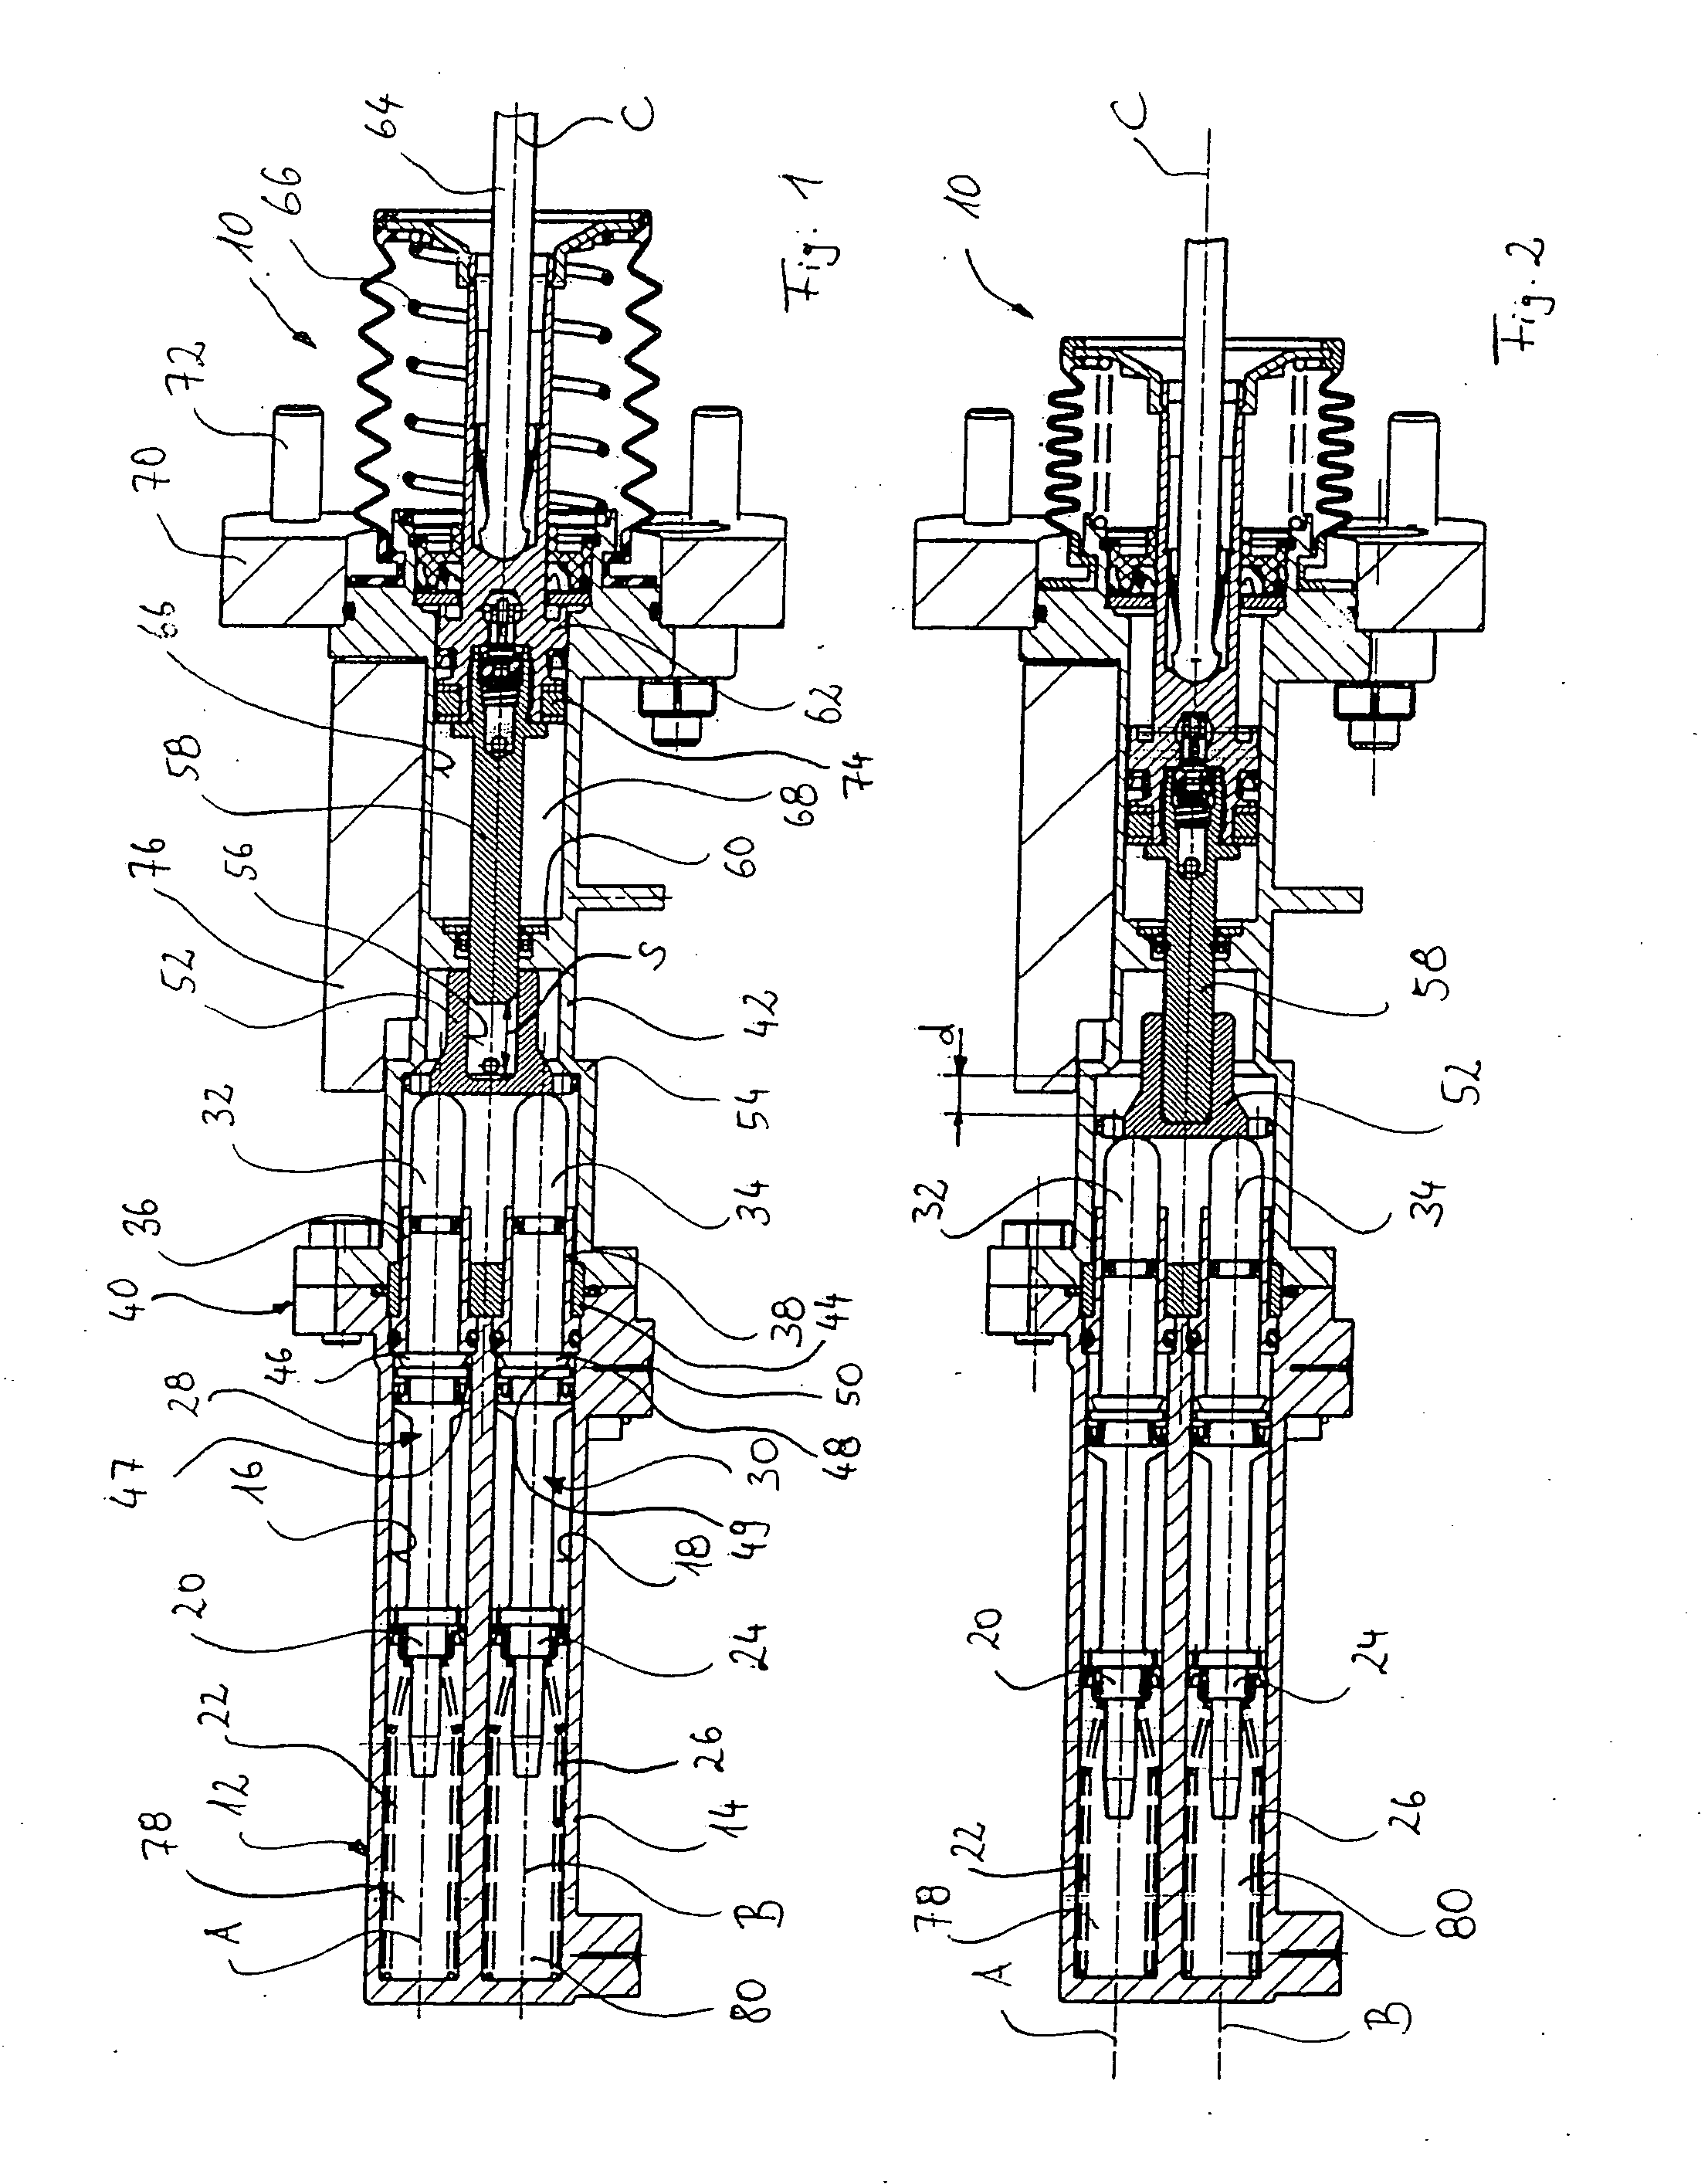 Master Cylinder System for an Automotive Hydraulic Brake System and Automotive Hydraulic Brake System